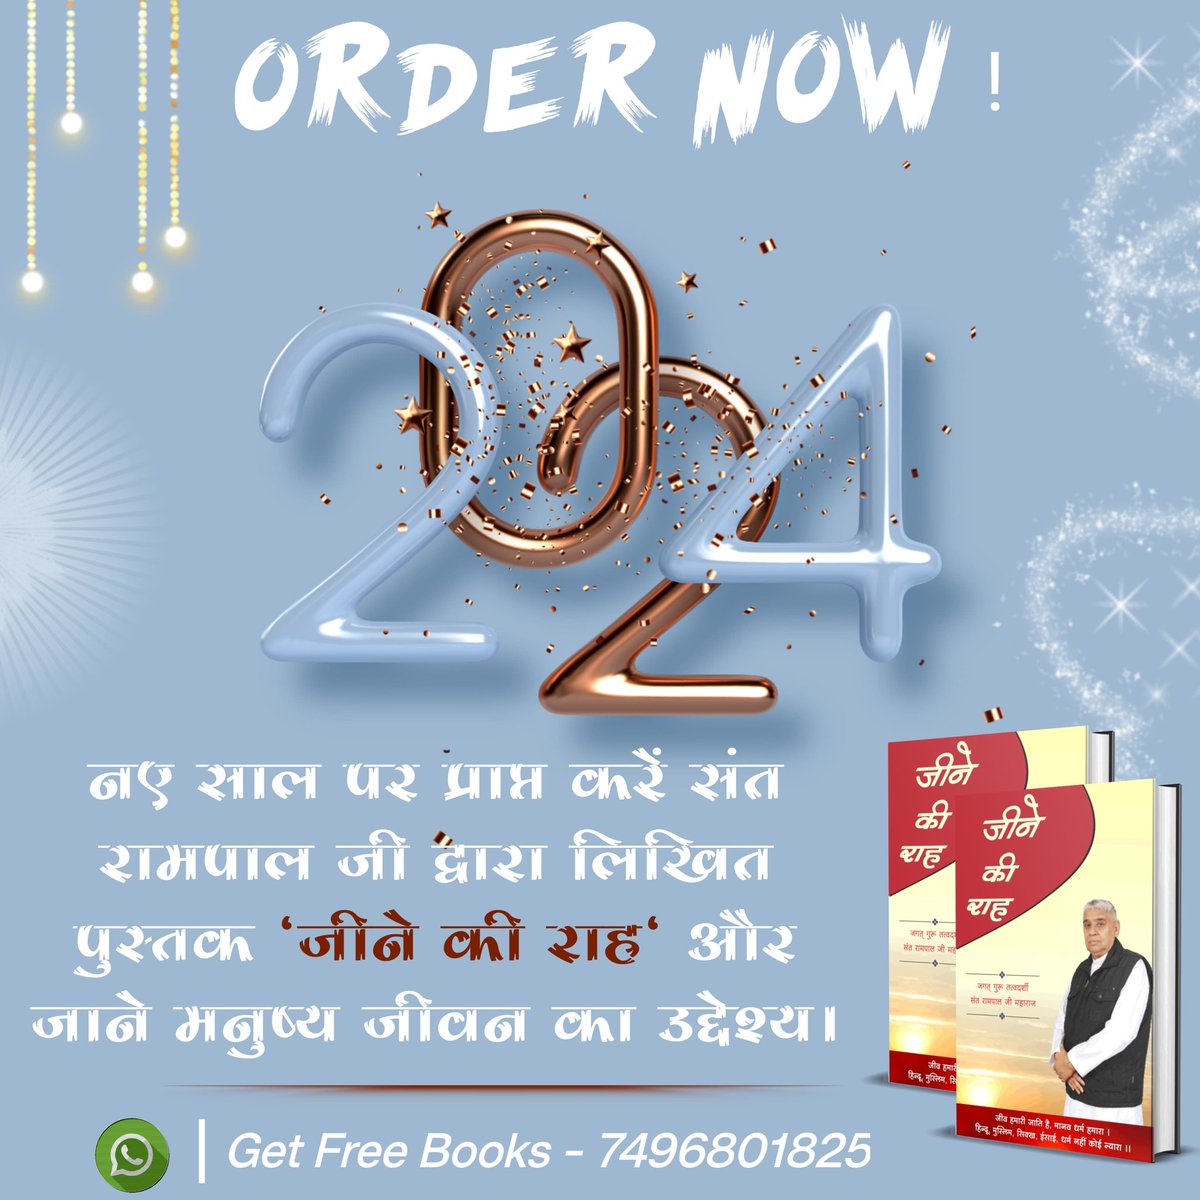 On the occasion of #StartNewLifeIn2024, the book Gyan Ganga and Way of Living, which brings happiness from house to house, after reading which joins the path of devotion, all the sorrows of a person gets redressed. - Sant Rampal Ji Maharaj #Mysterious_Prophecies